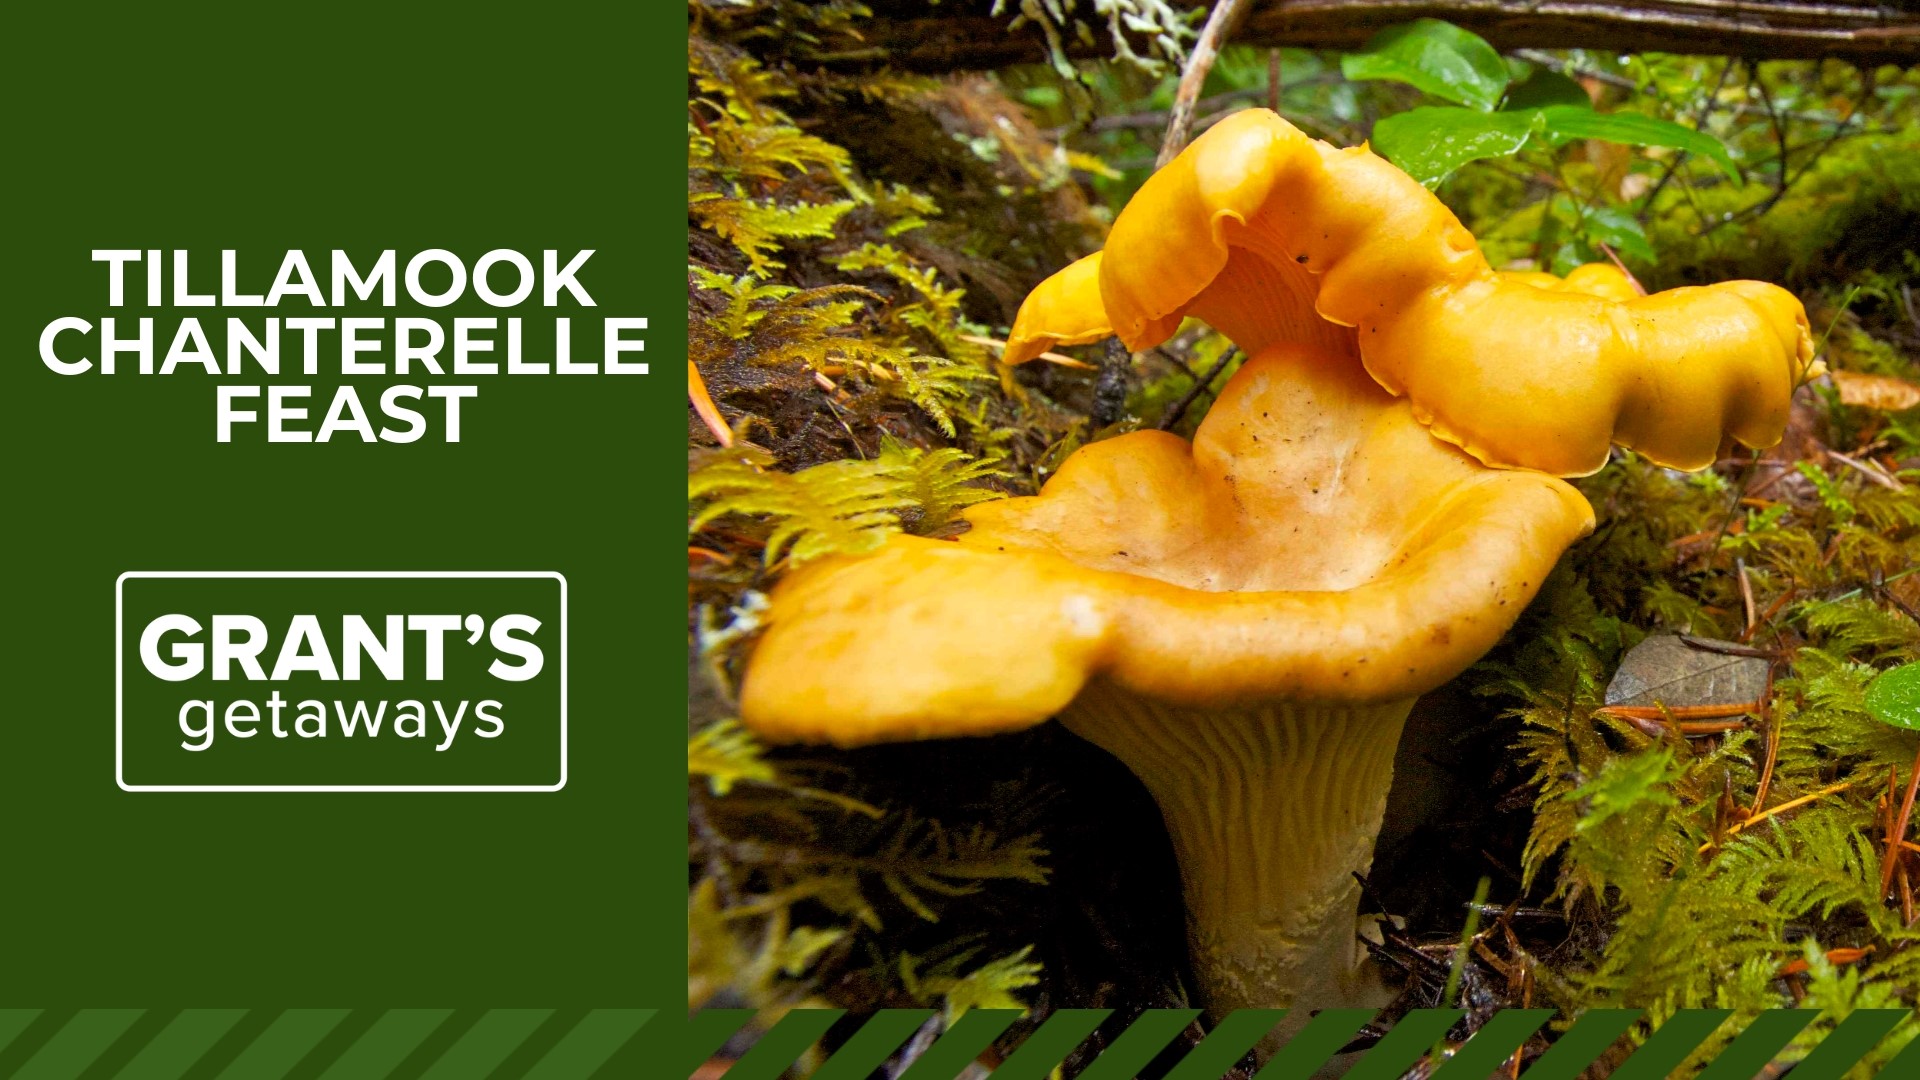 The gorgeous fungi have been Oregon's official State Mushroom since 1999, and they're the centerpiece of many a delicious recipe.